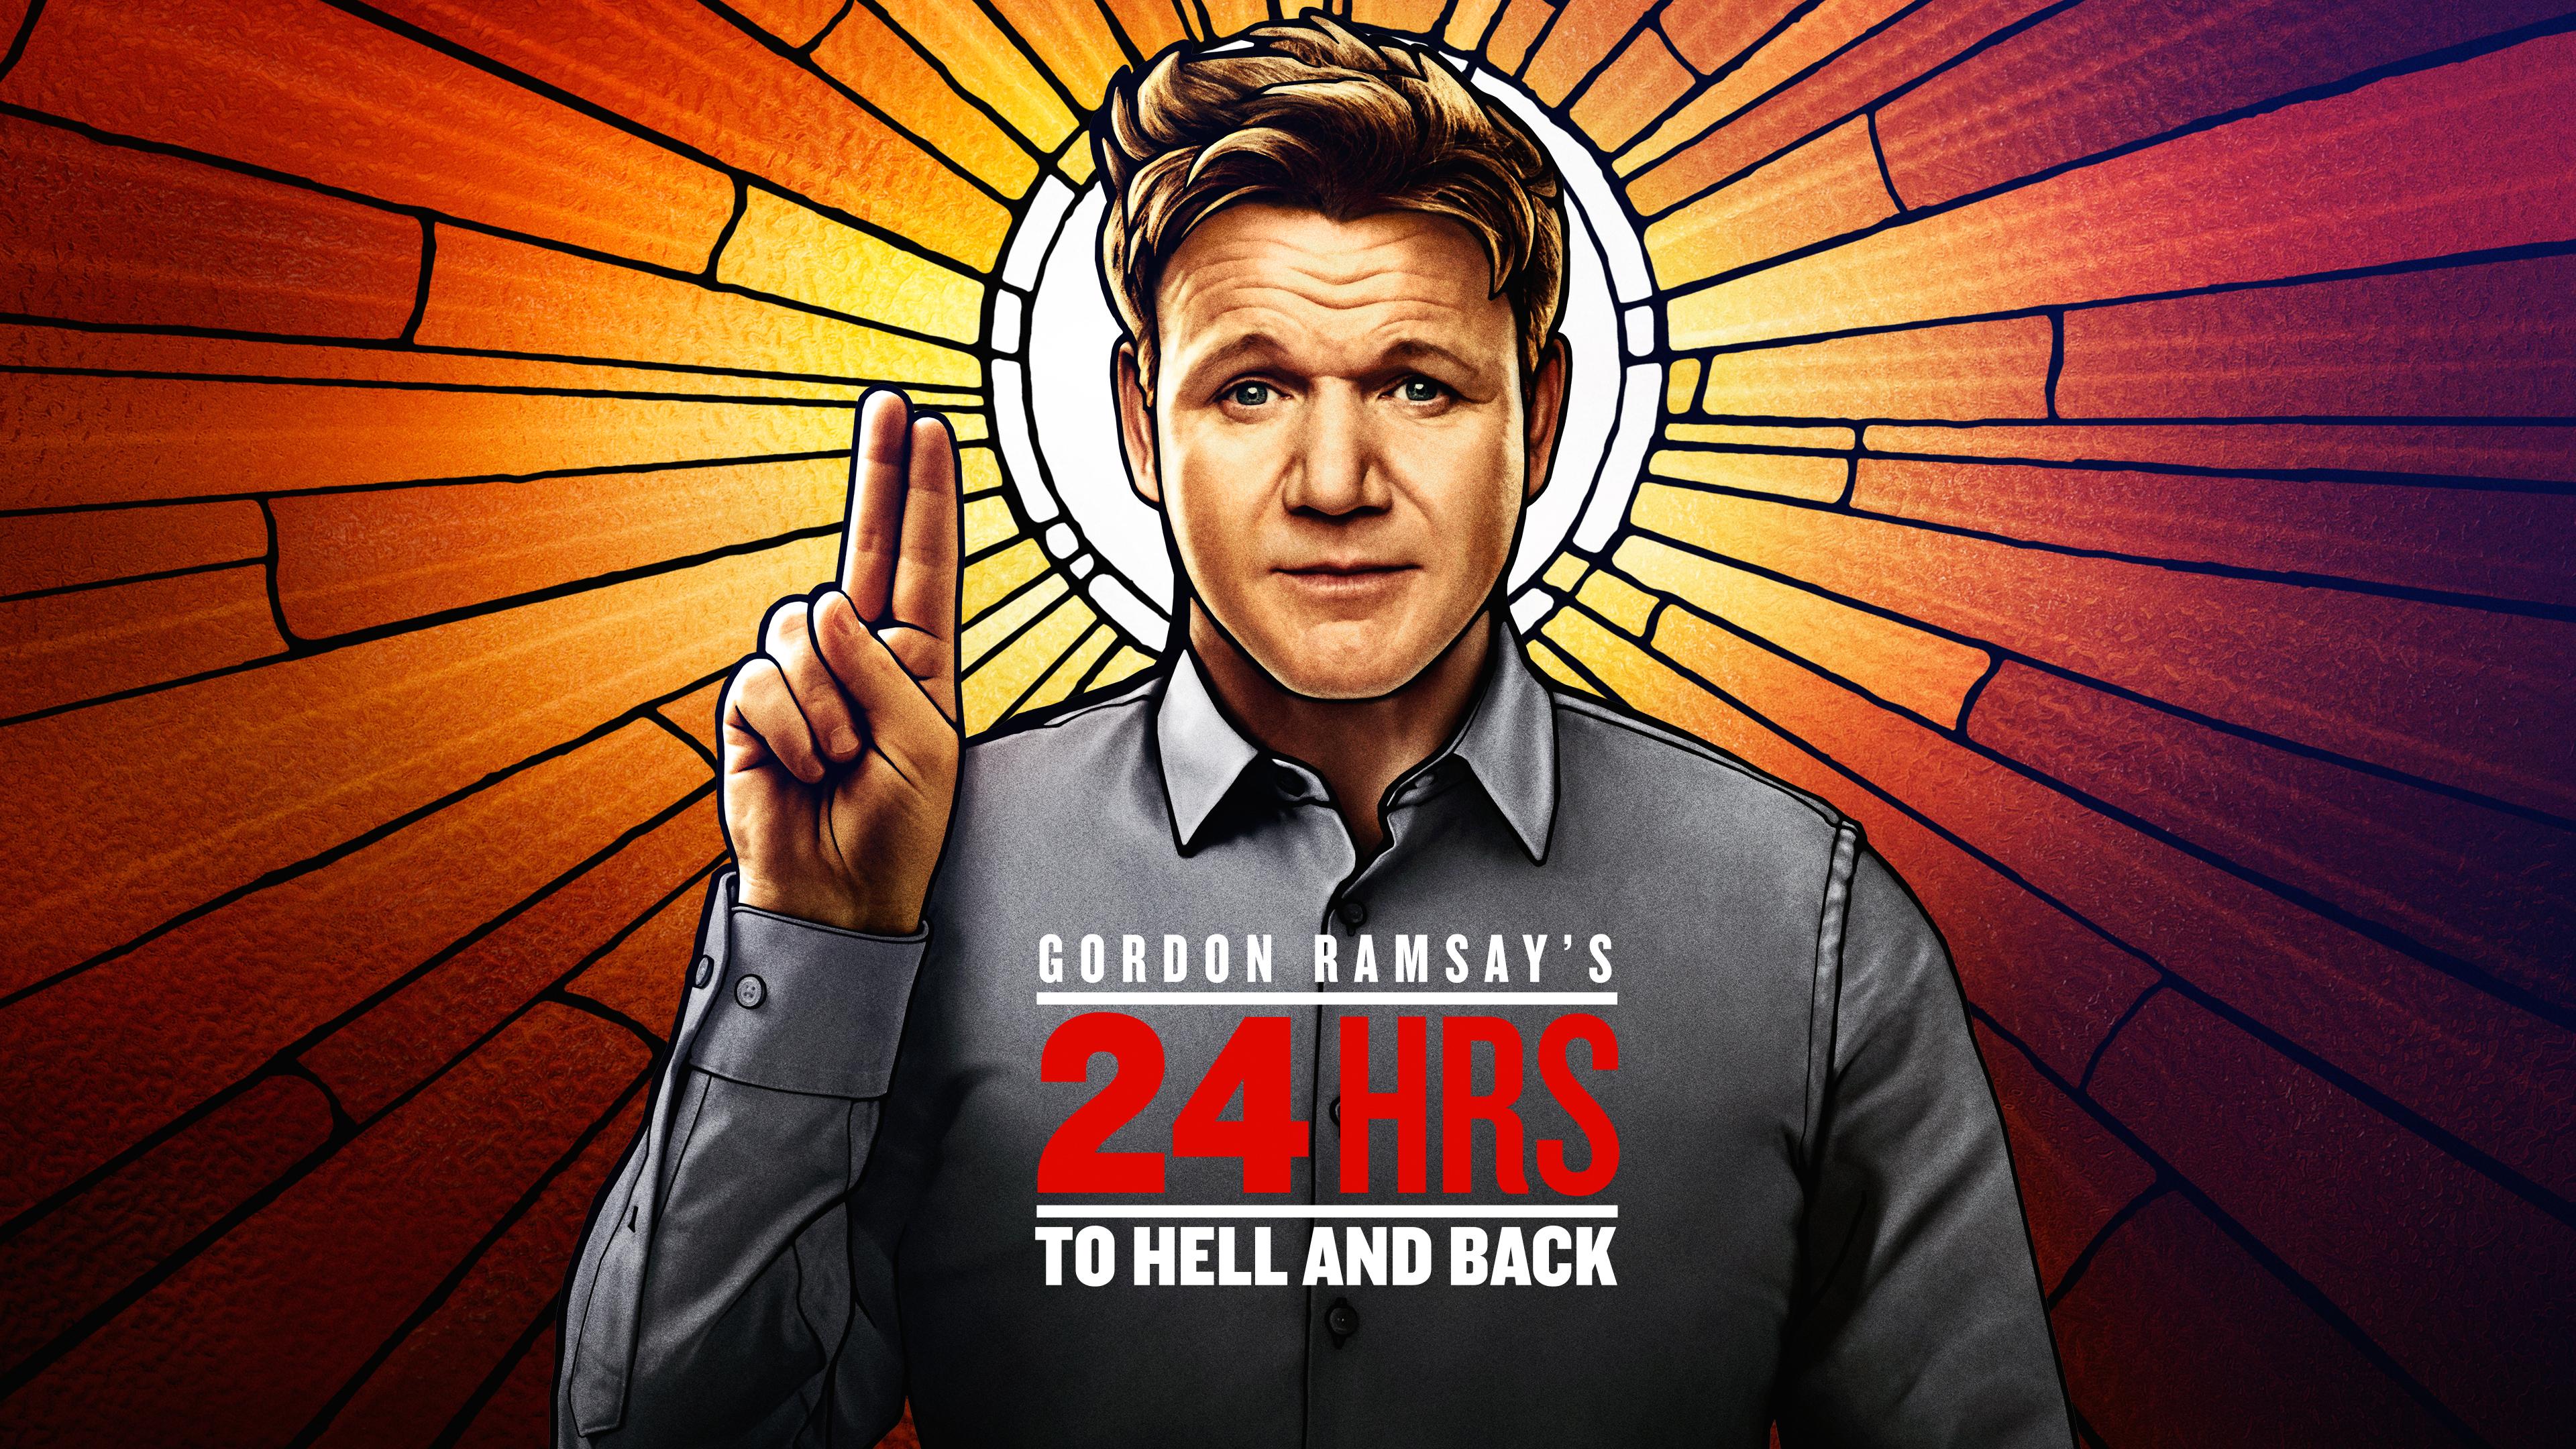 Gordon Ramsay 24 Hours To Hell And Back, HD Tv Shows, 4k Wallpaper